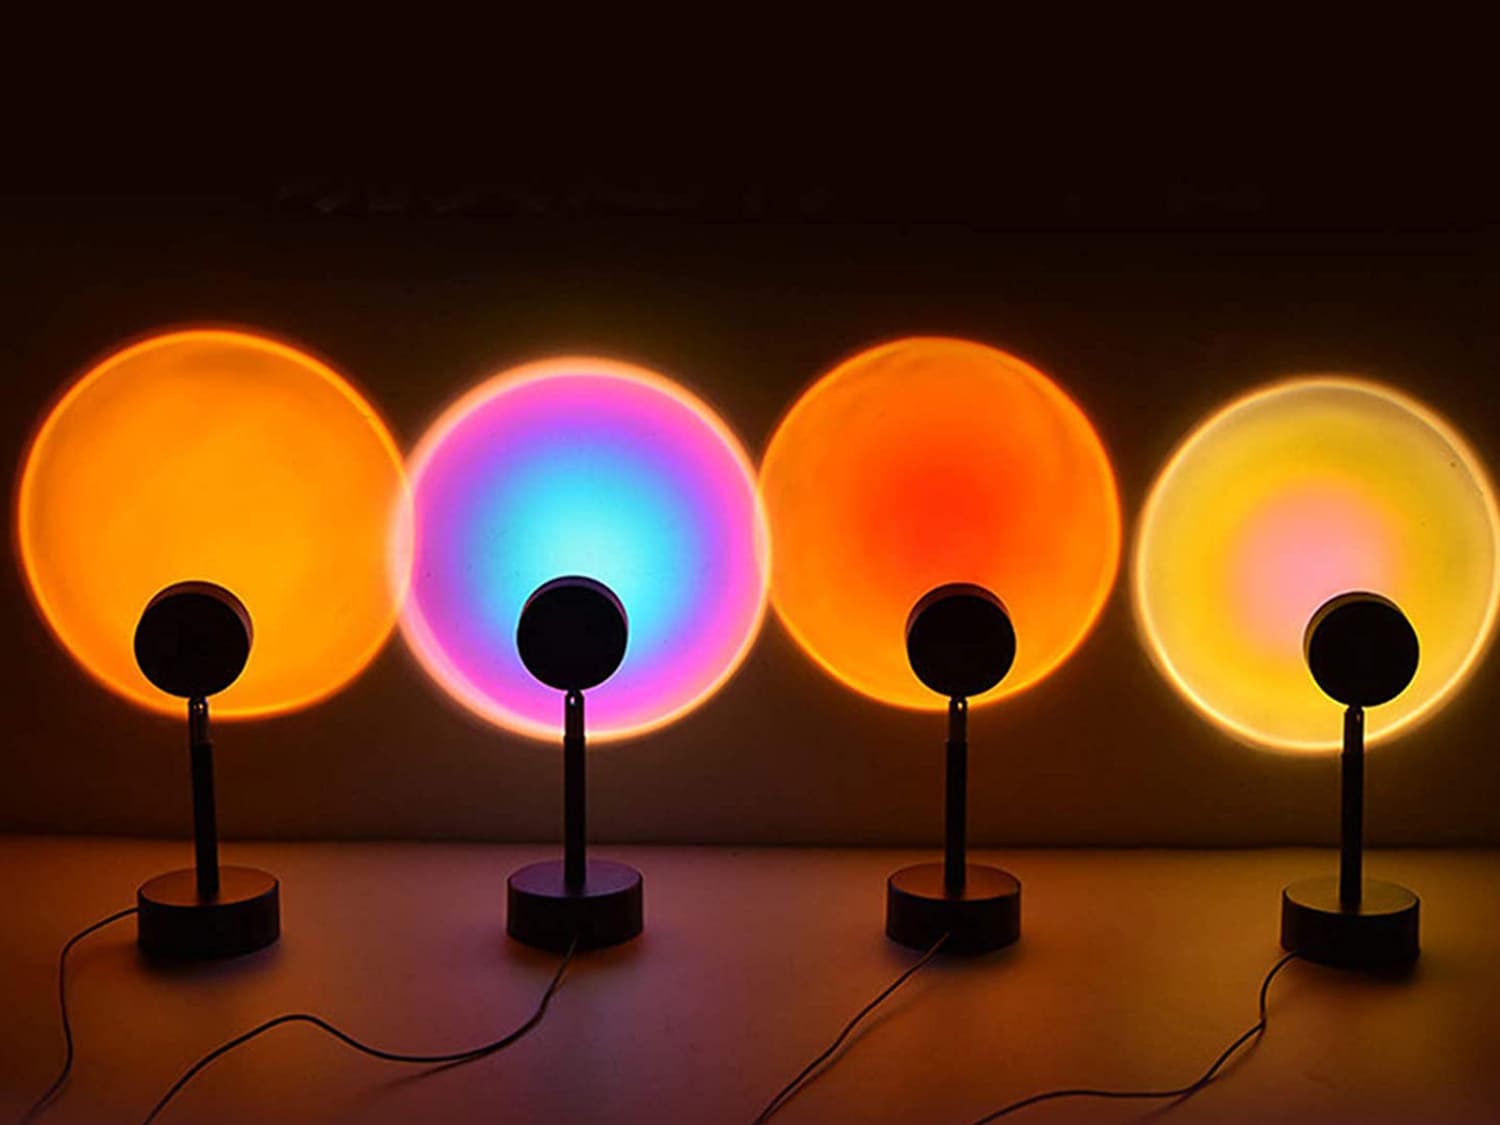 Films for Night Light Changeable Colors for Home Party Living Room Bedroom Decor 66mm 5 Different Color Lamp Films for Sunset Lamp 